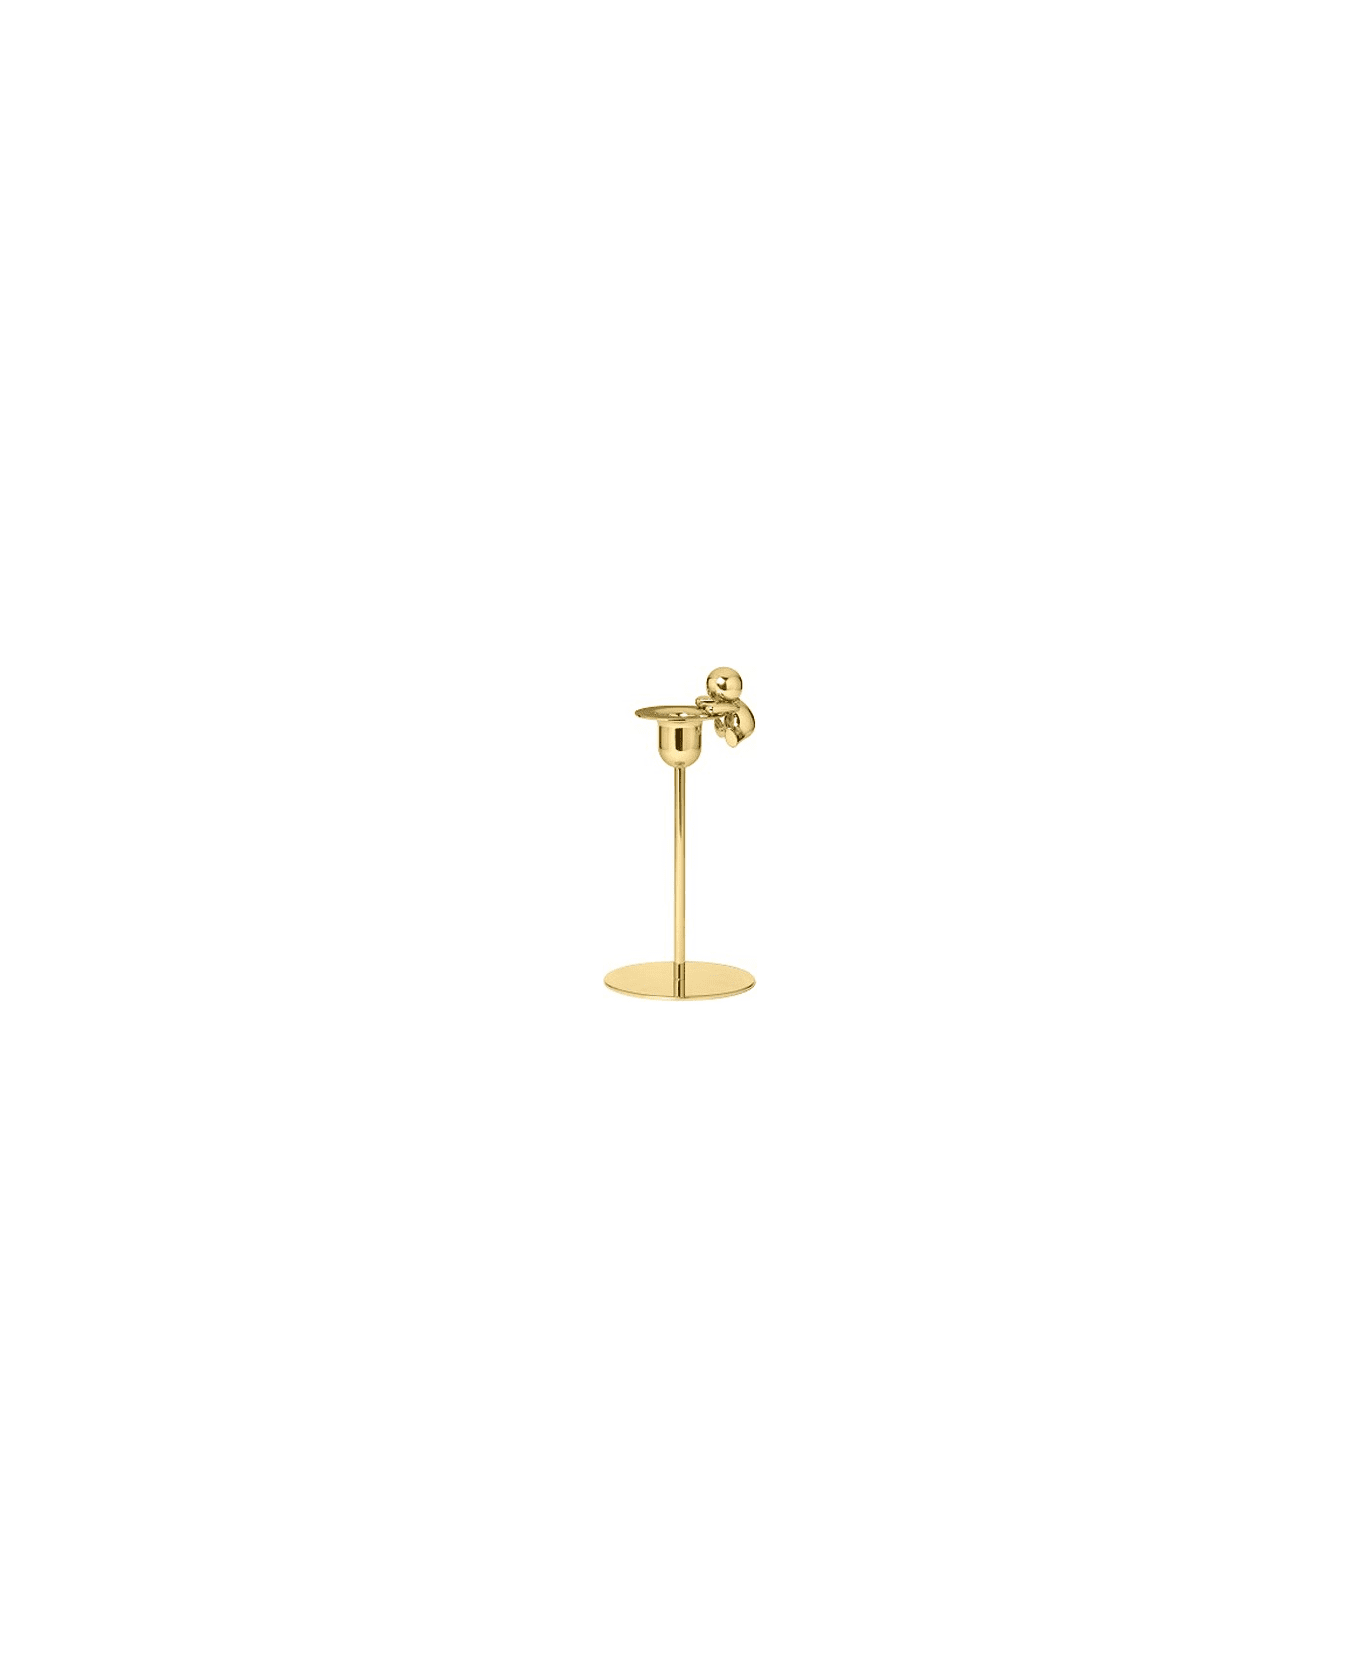 Ghidini 1961 Omini - The Climber Short Candlestick Polished Brass - Polished brass